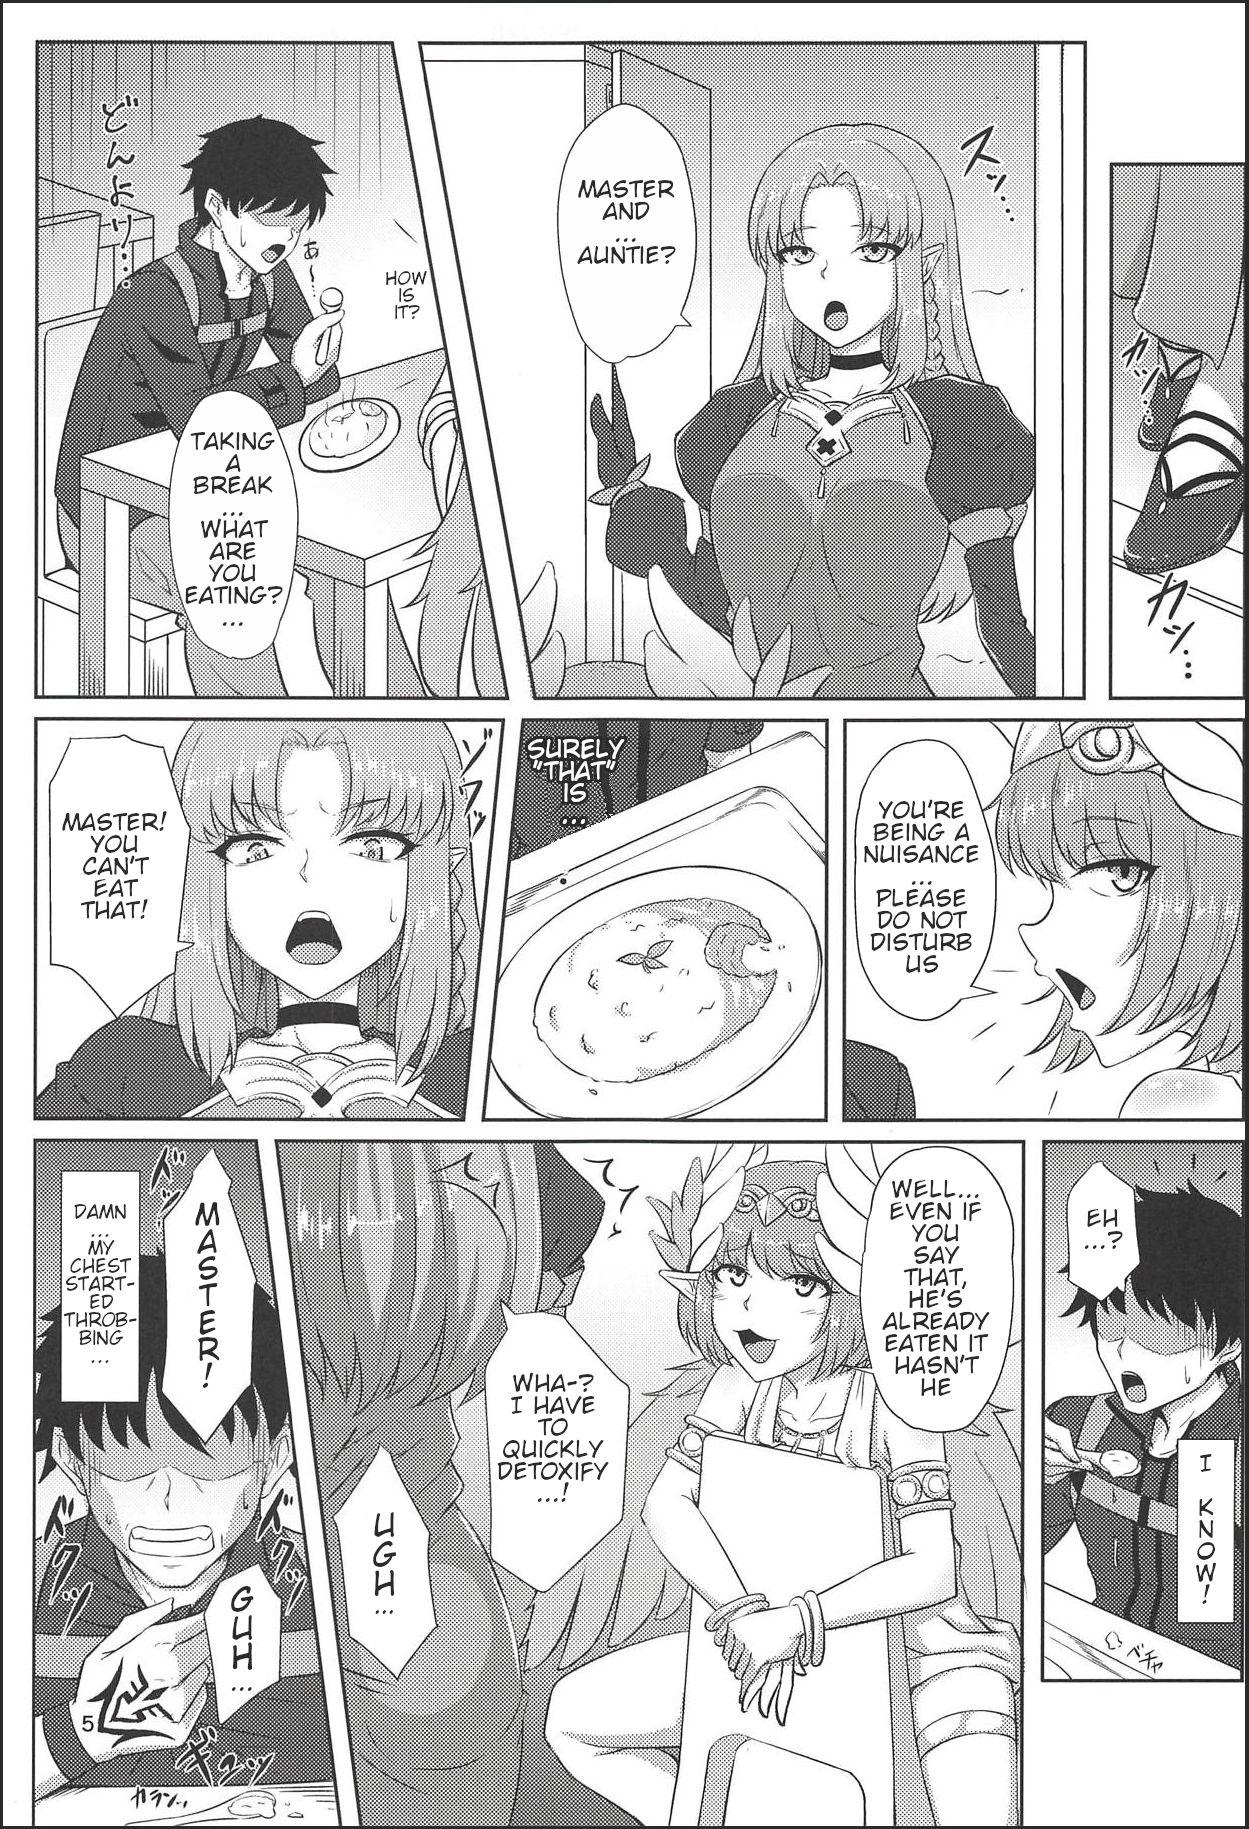 Blowing Witch's Happen - Fate grand order Gay Money - Page 4